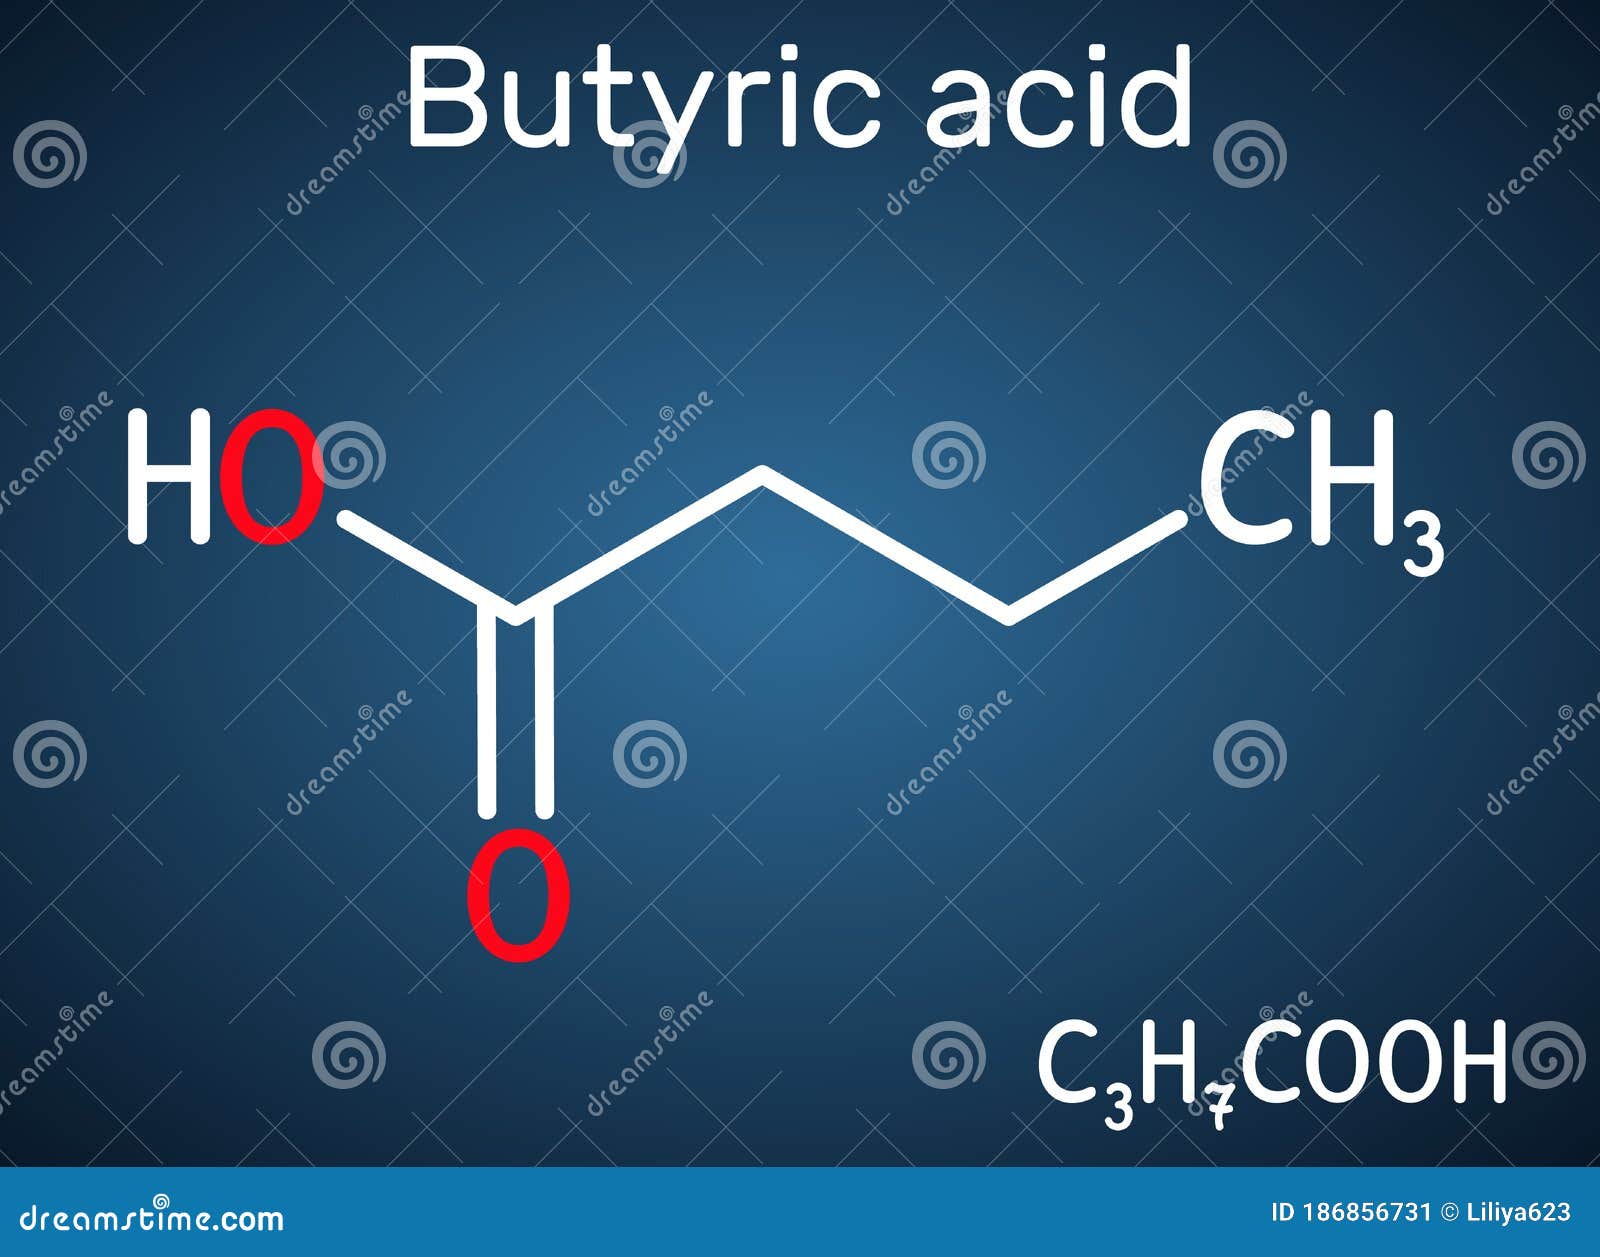 butyric acid, butanoic acid molecule. butyrates or butanoates are salts and esters . structural chemical formula on the dark blue